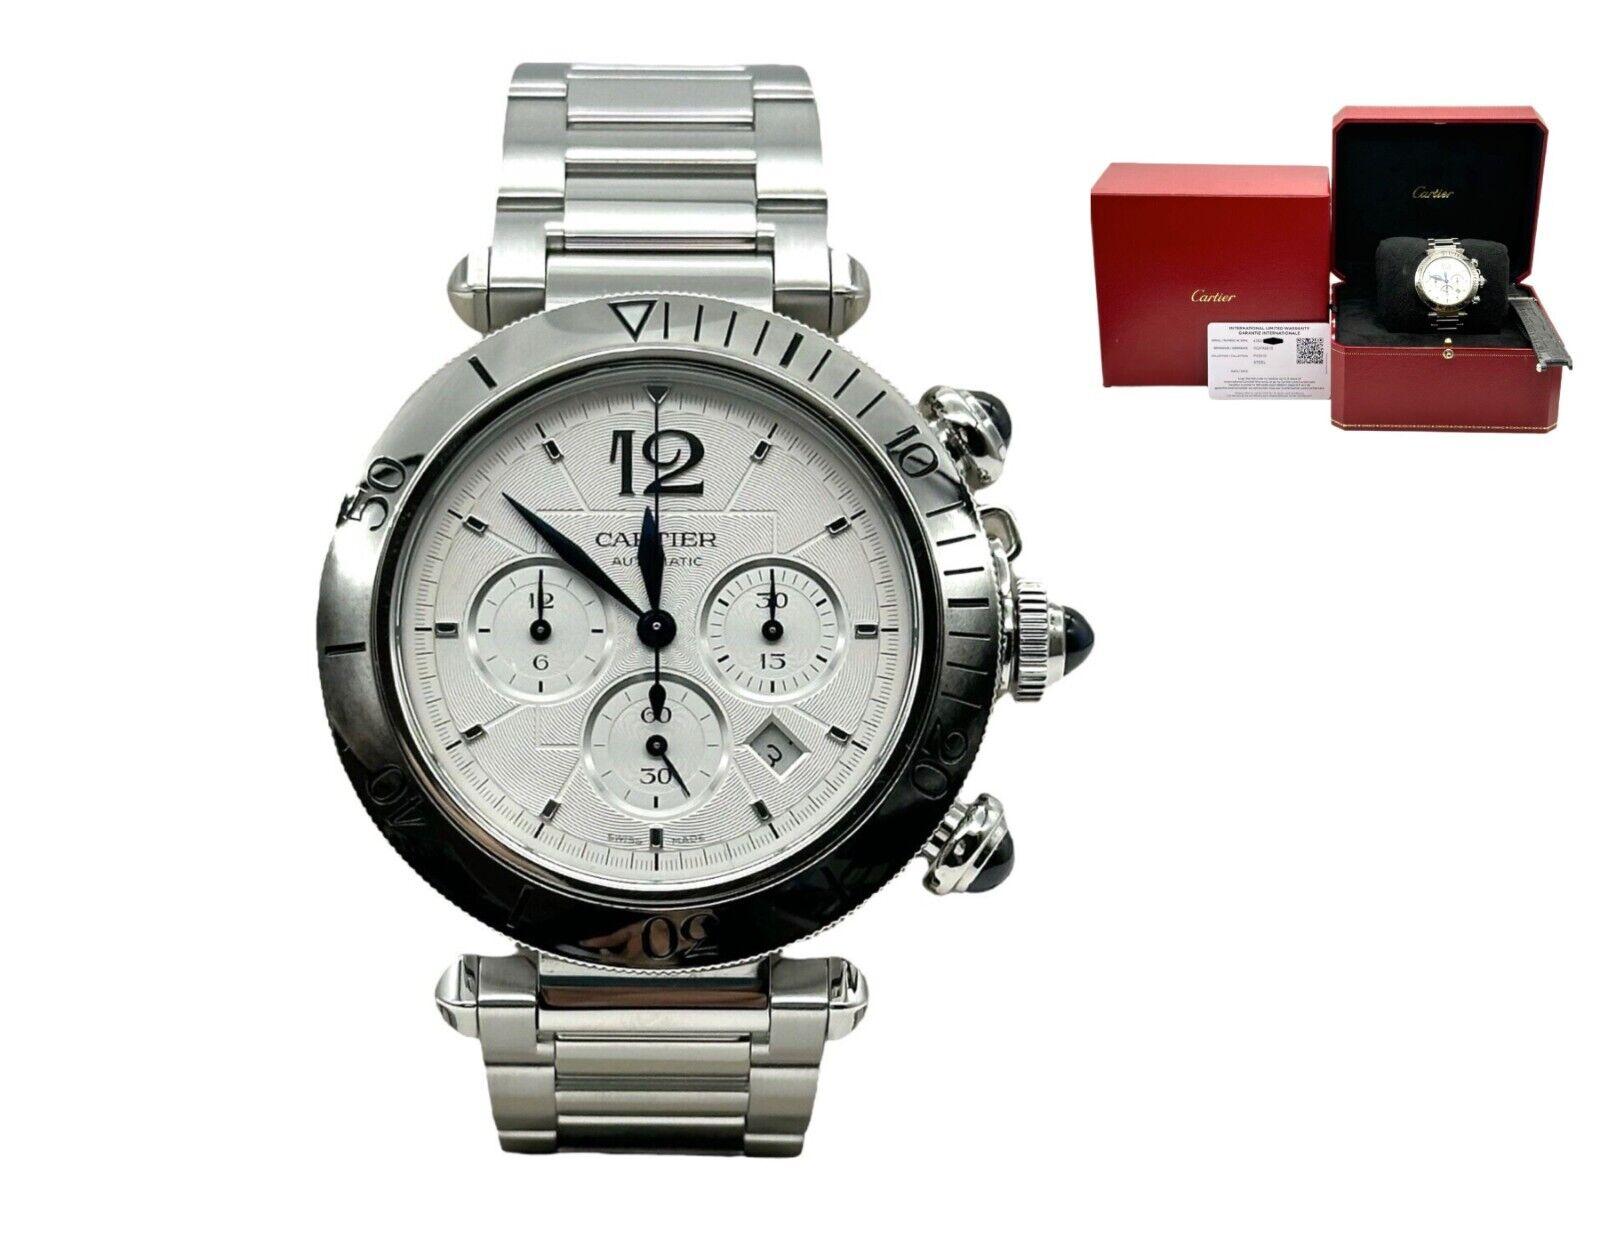 Cartier Pasha WSPA0018 Chronograph Ref 4363 Chronograph Stainless Box Paper For Sale 3